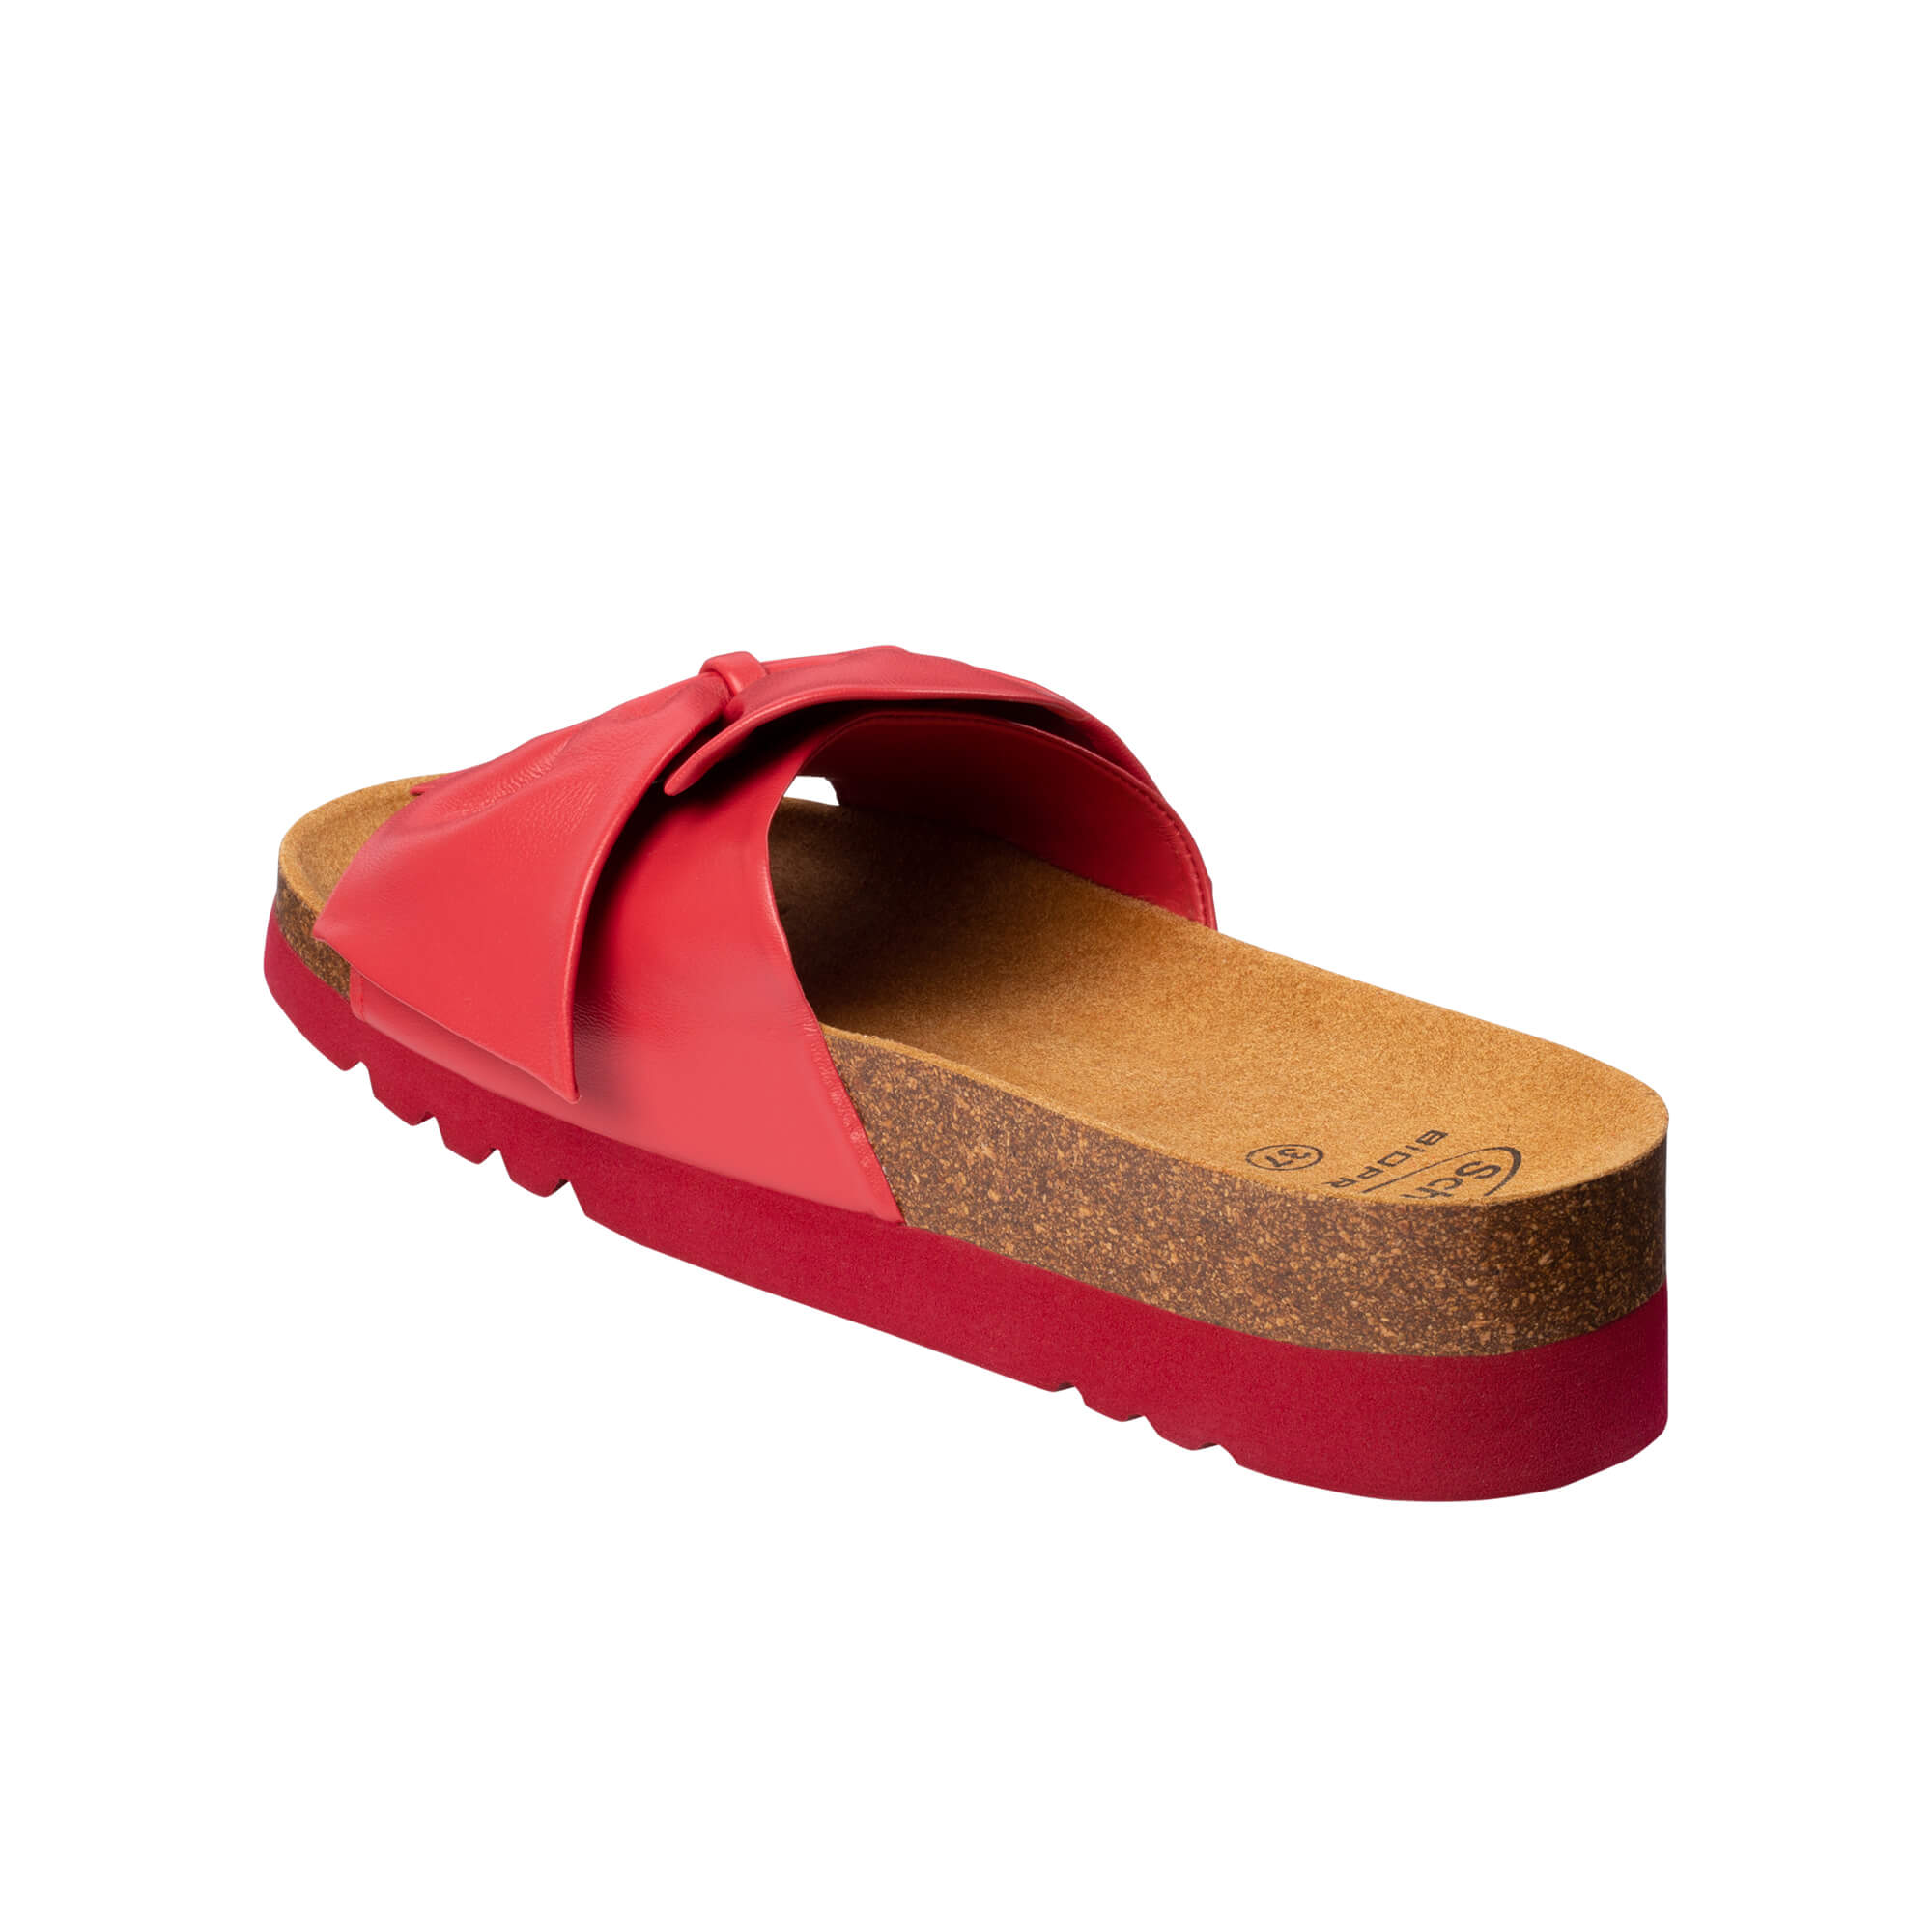 SCHOLL Sandale BOWY 2.0 in Rot 